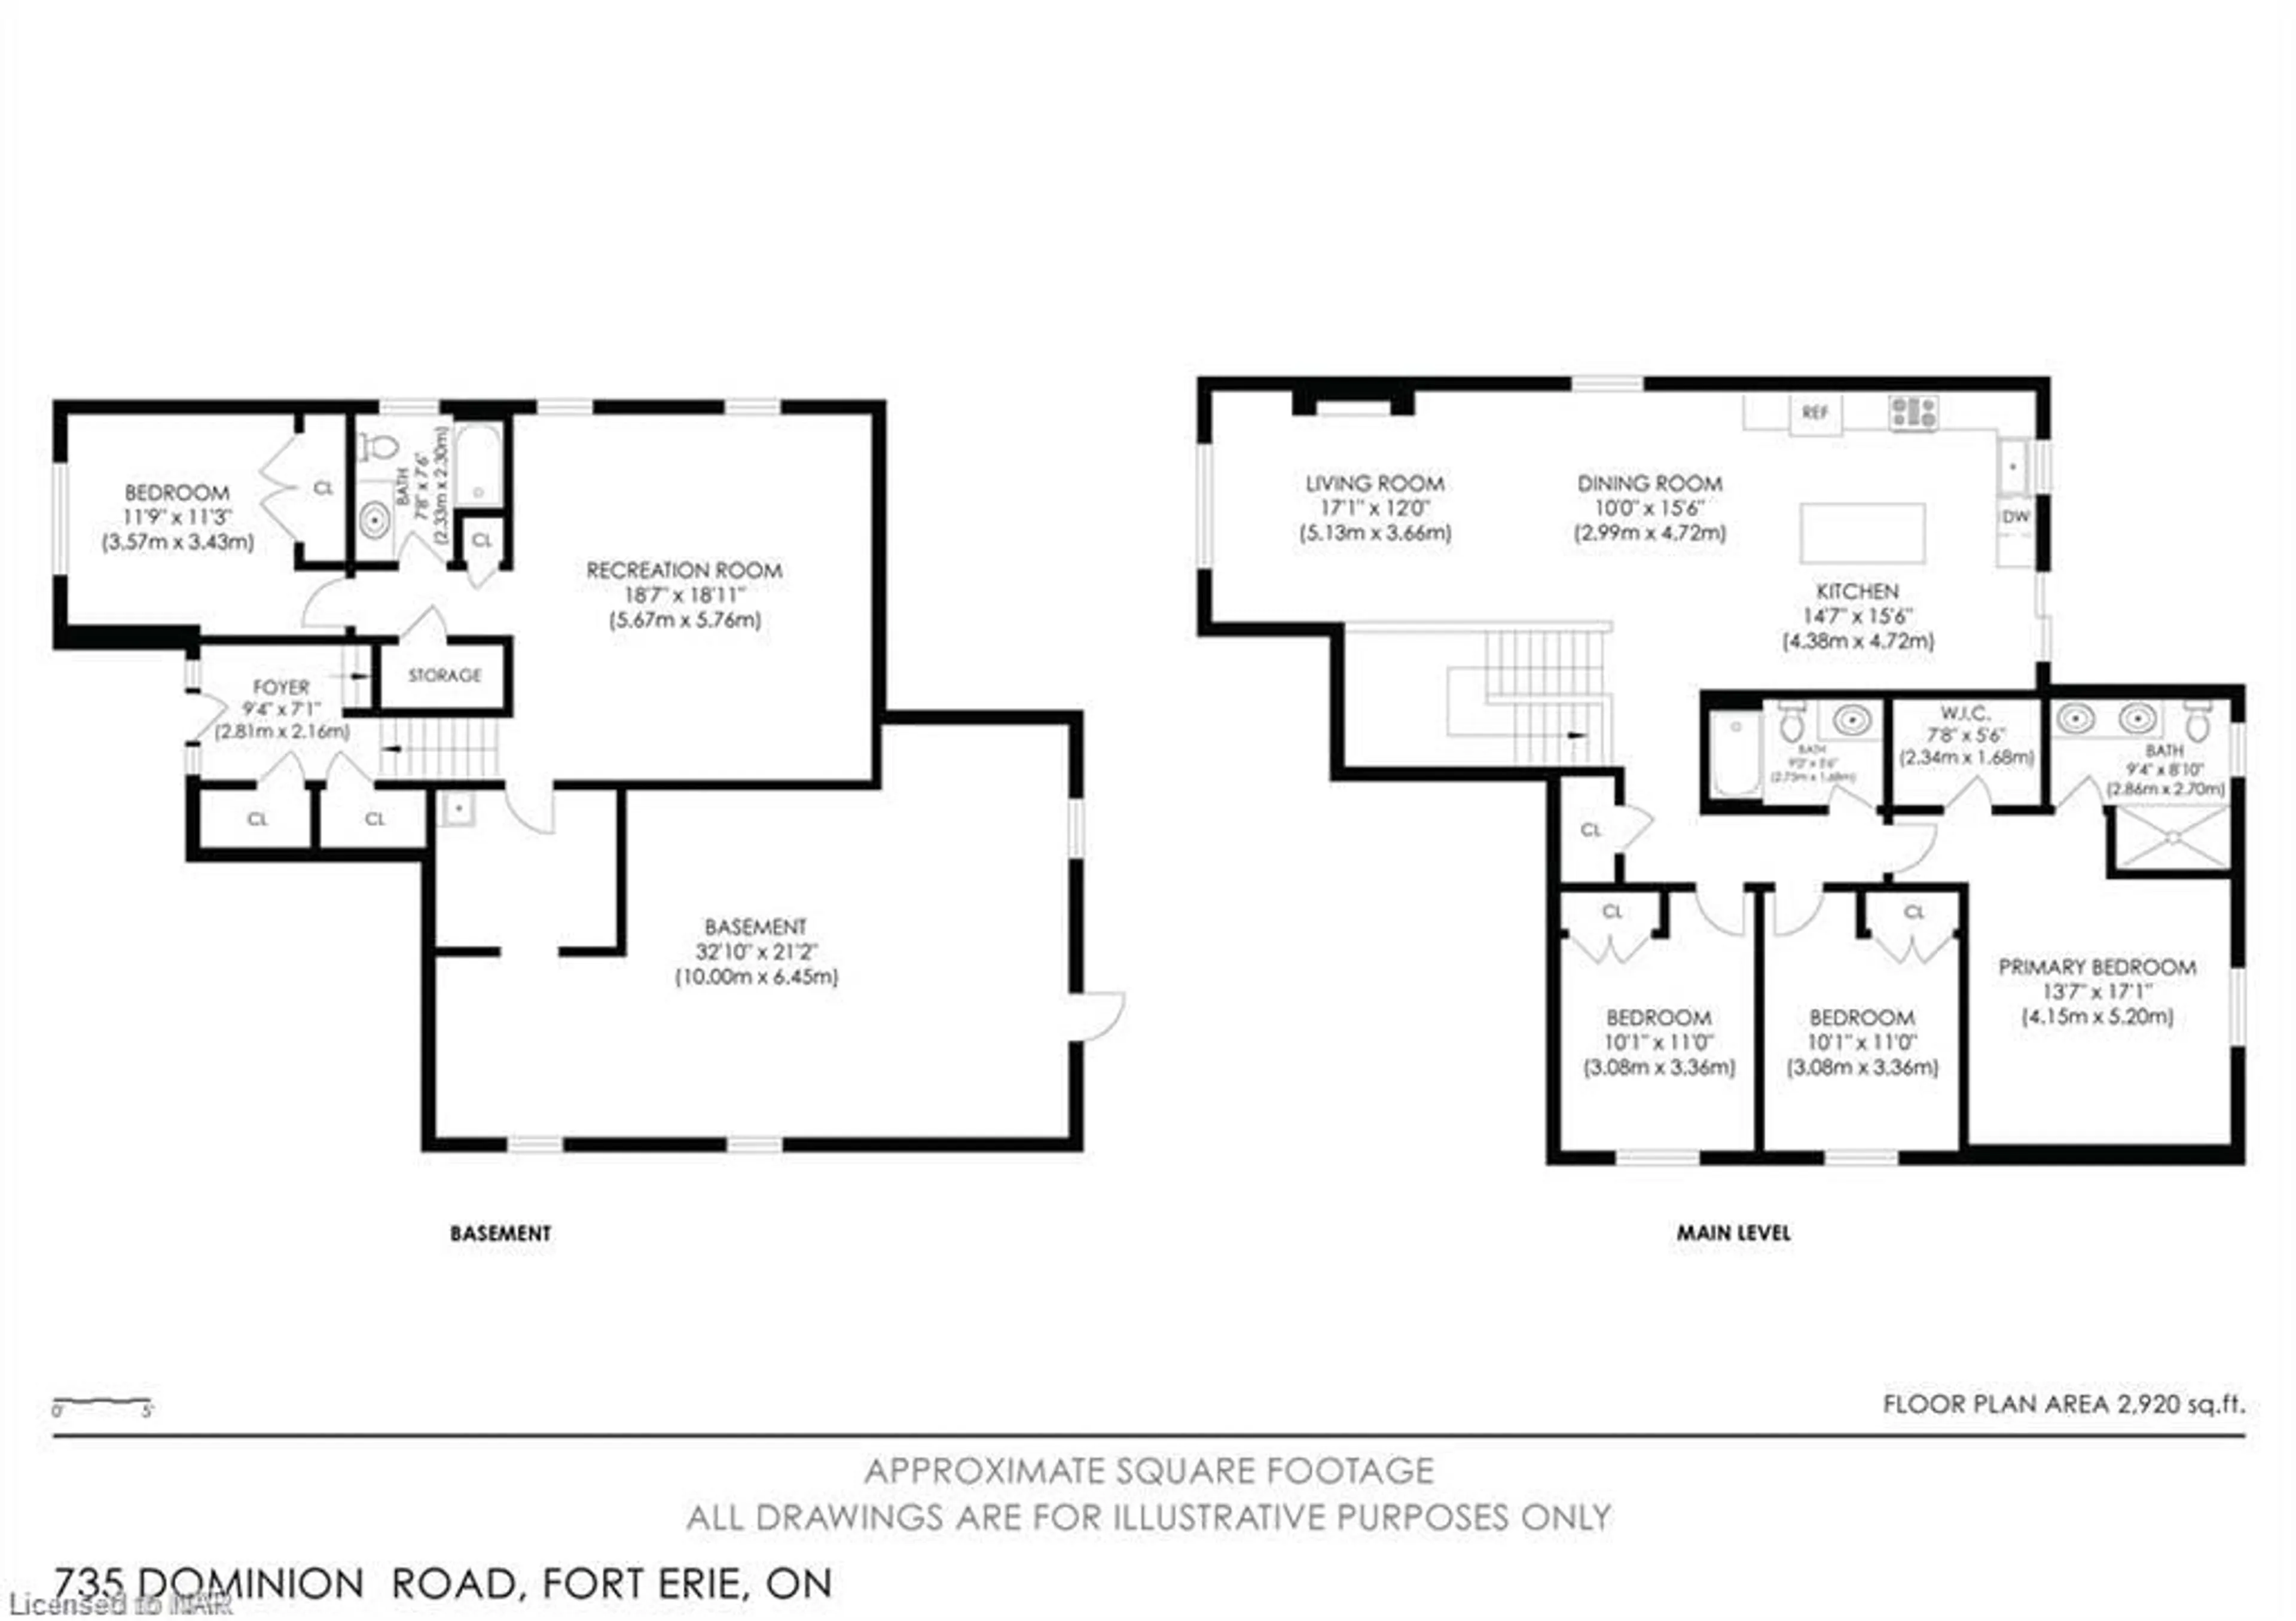 Floor plan for 735 Dominion Rd, Fort Erie Ontario L2A 1G9